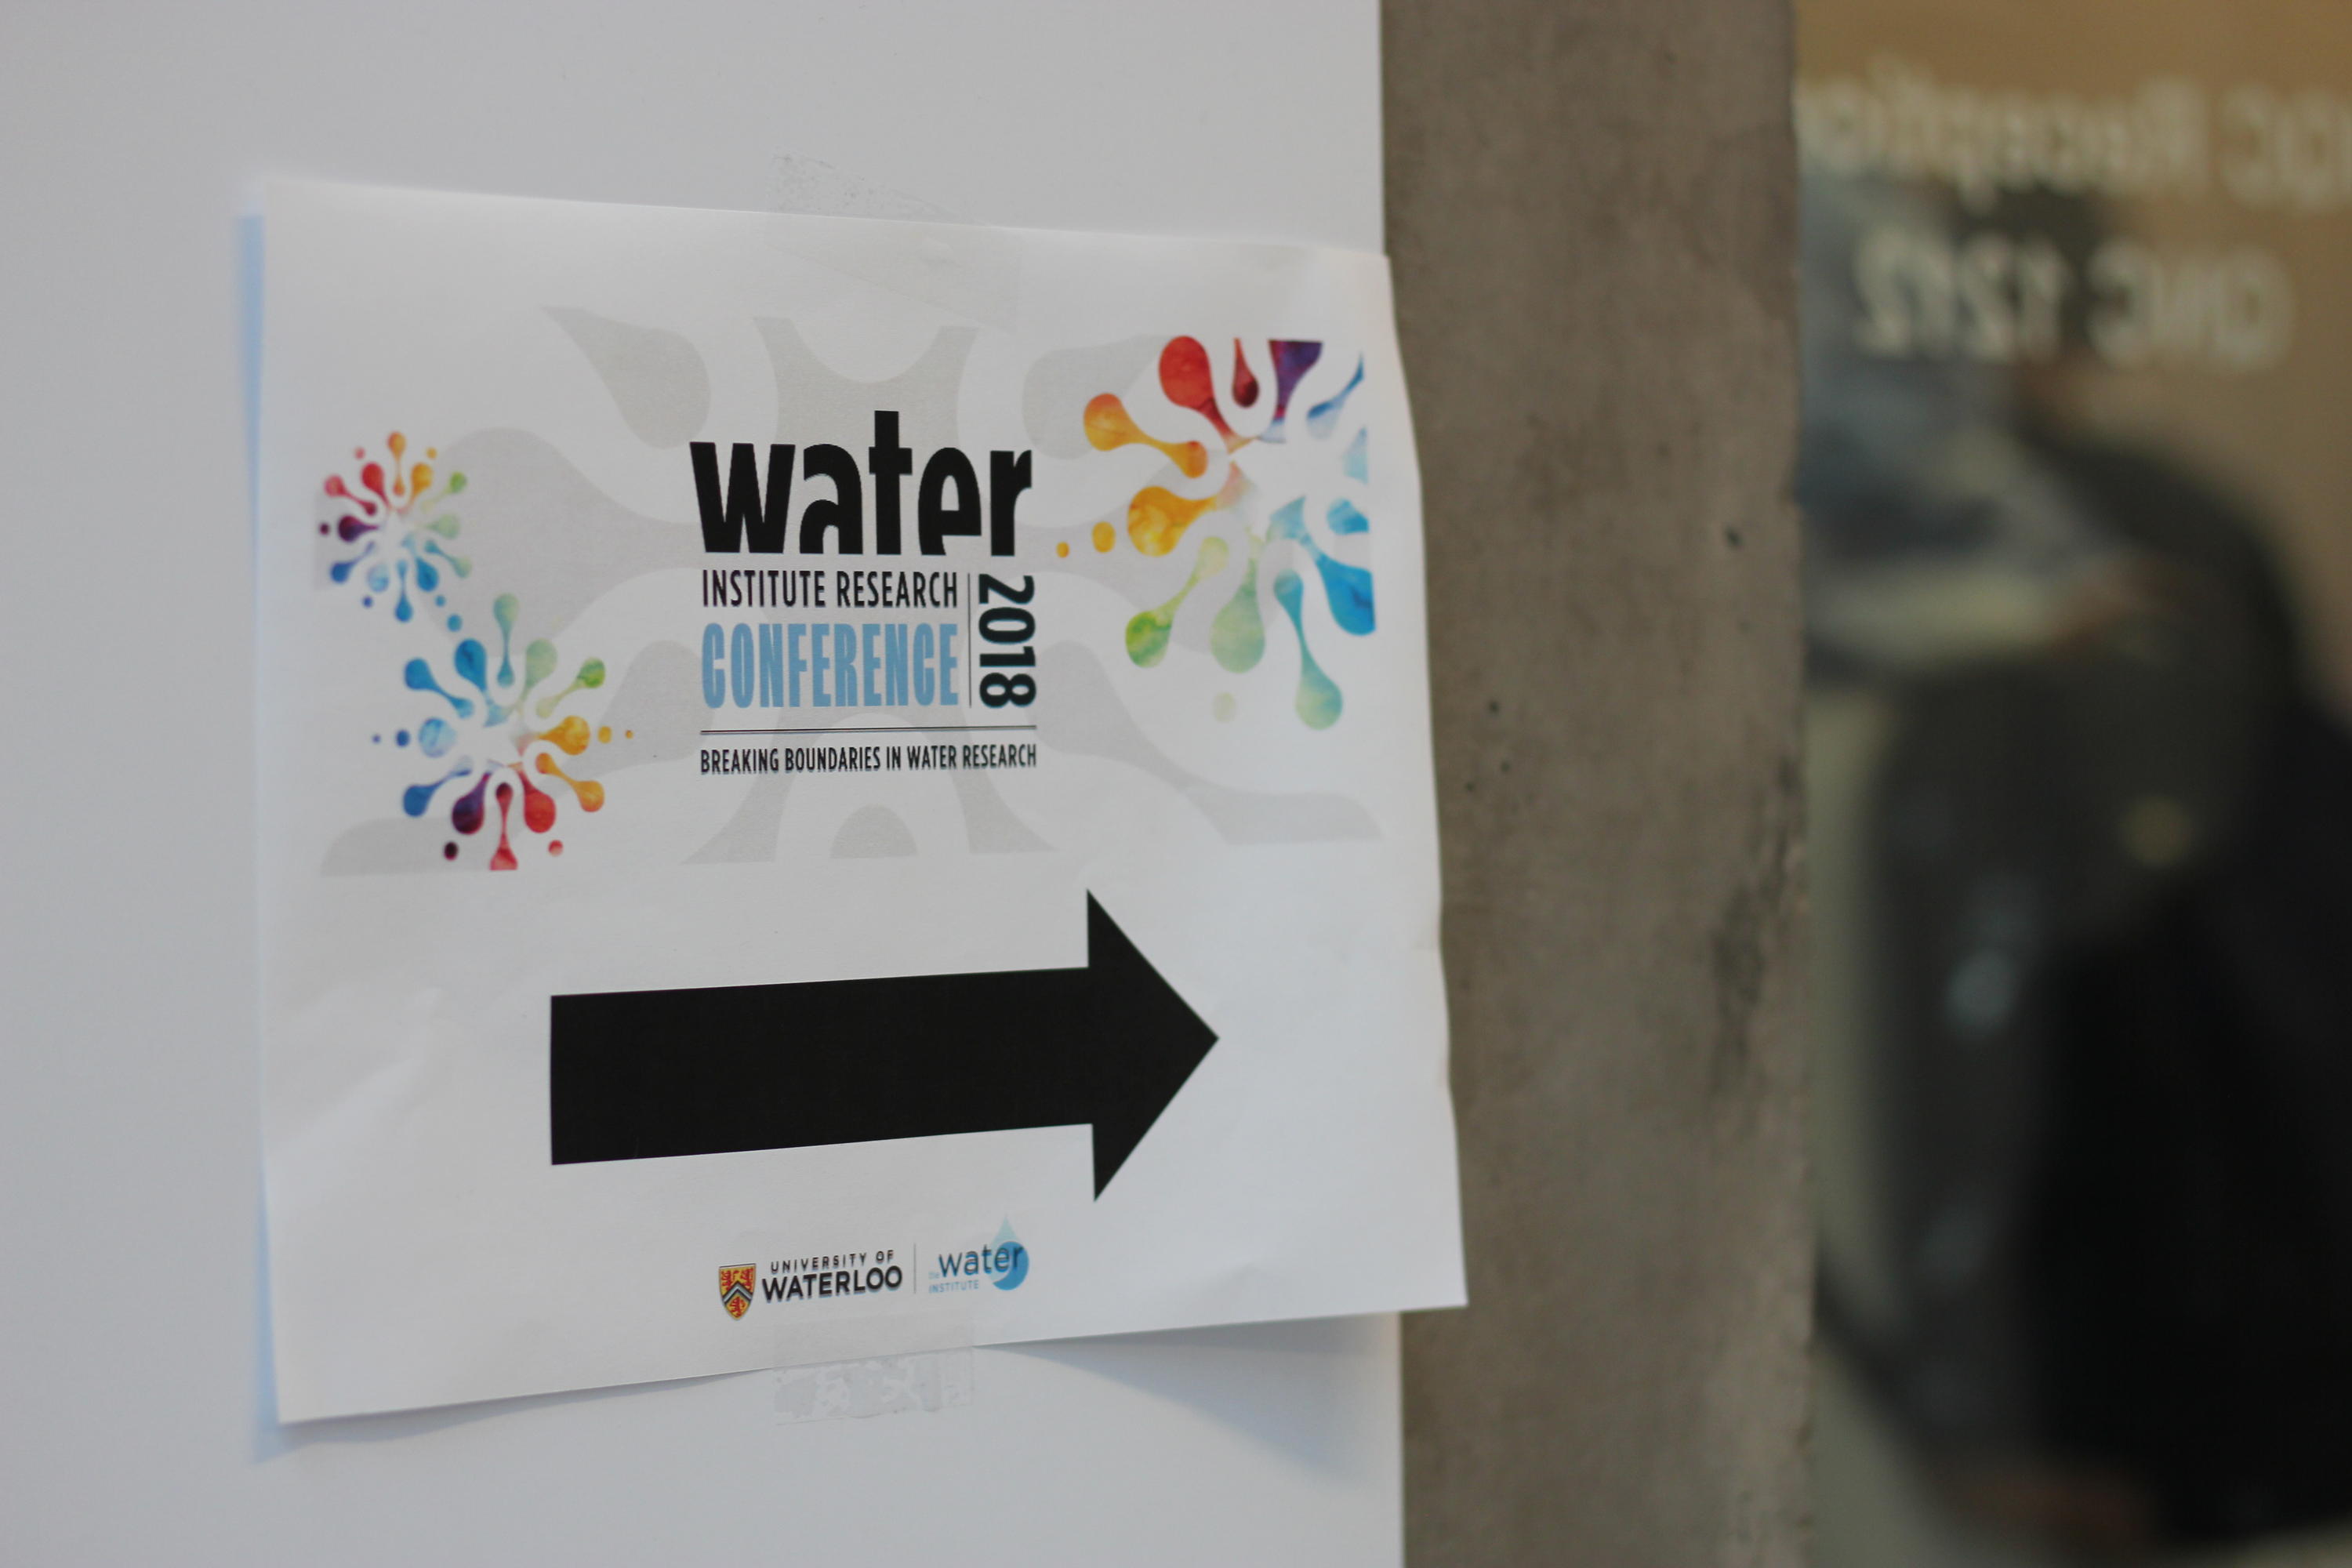 water institute research conference sign